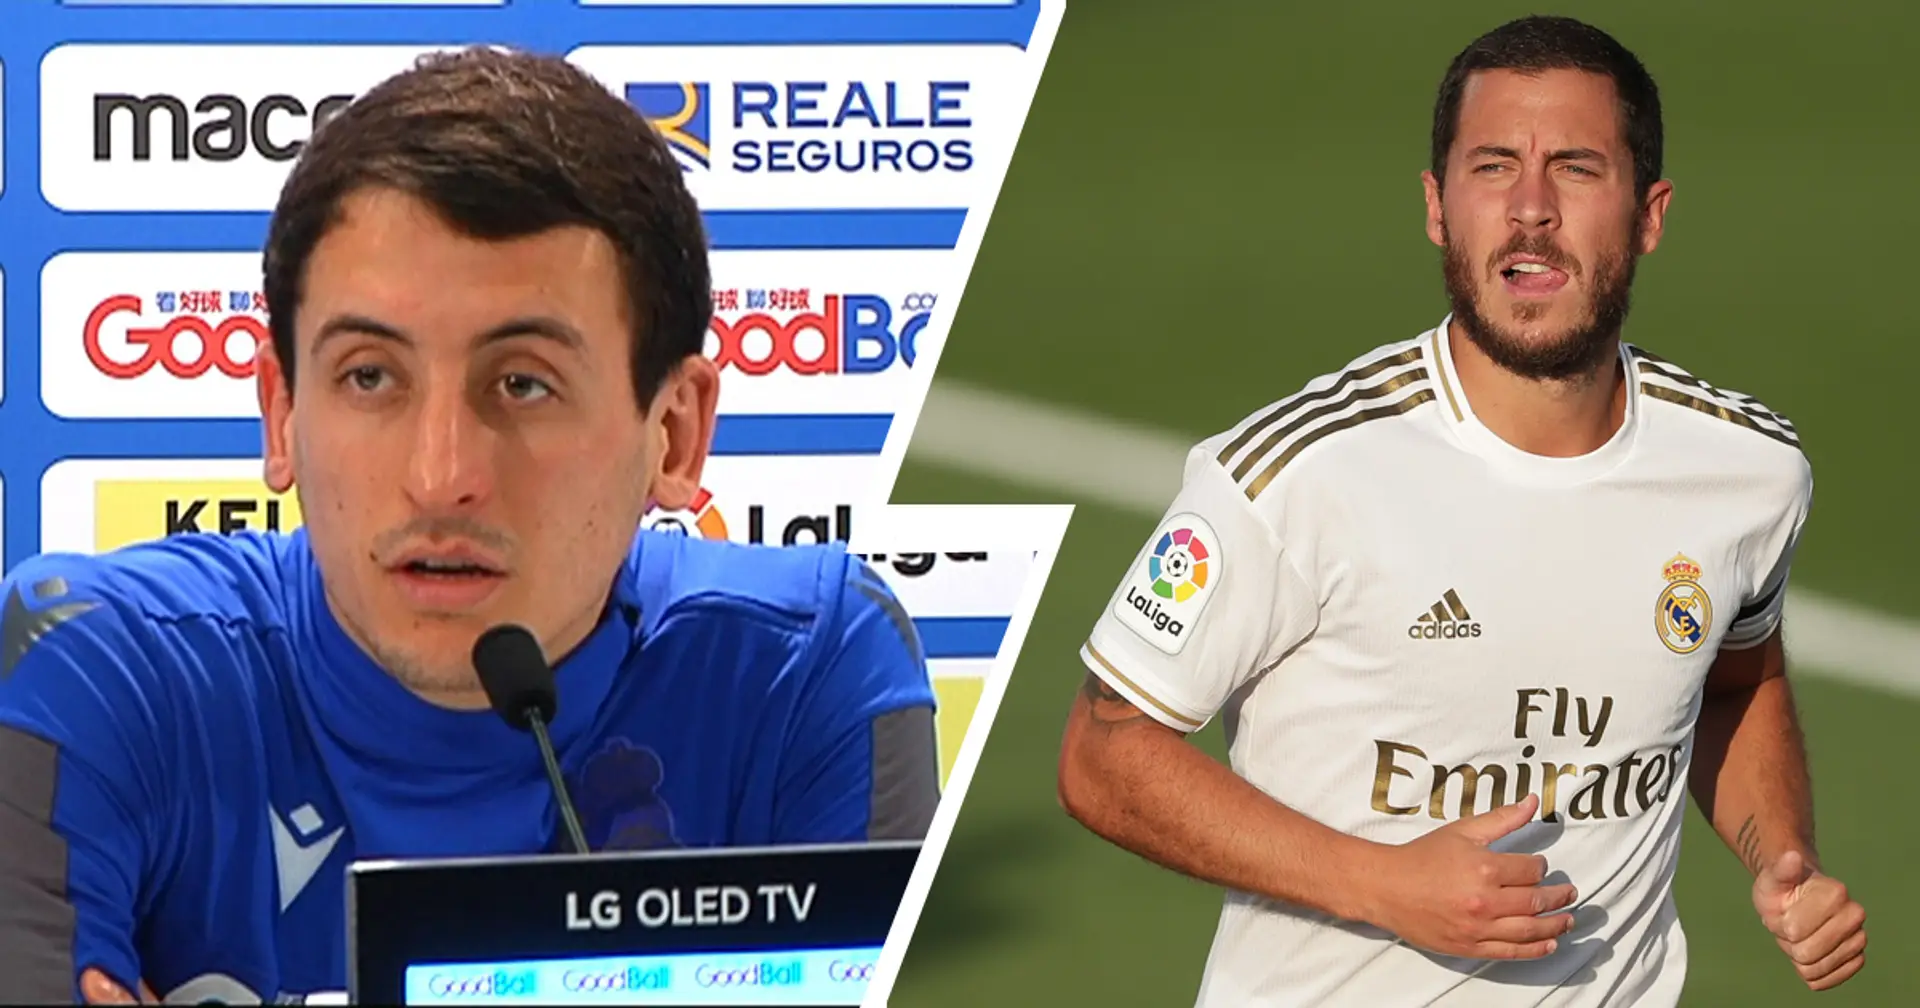 'He's at the top of his game, very difficult to stop': Mikel  Oyarzabal names Eden Hazard as Real Sociedad's main threat